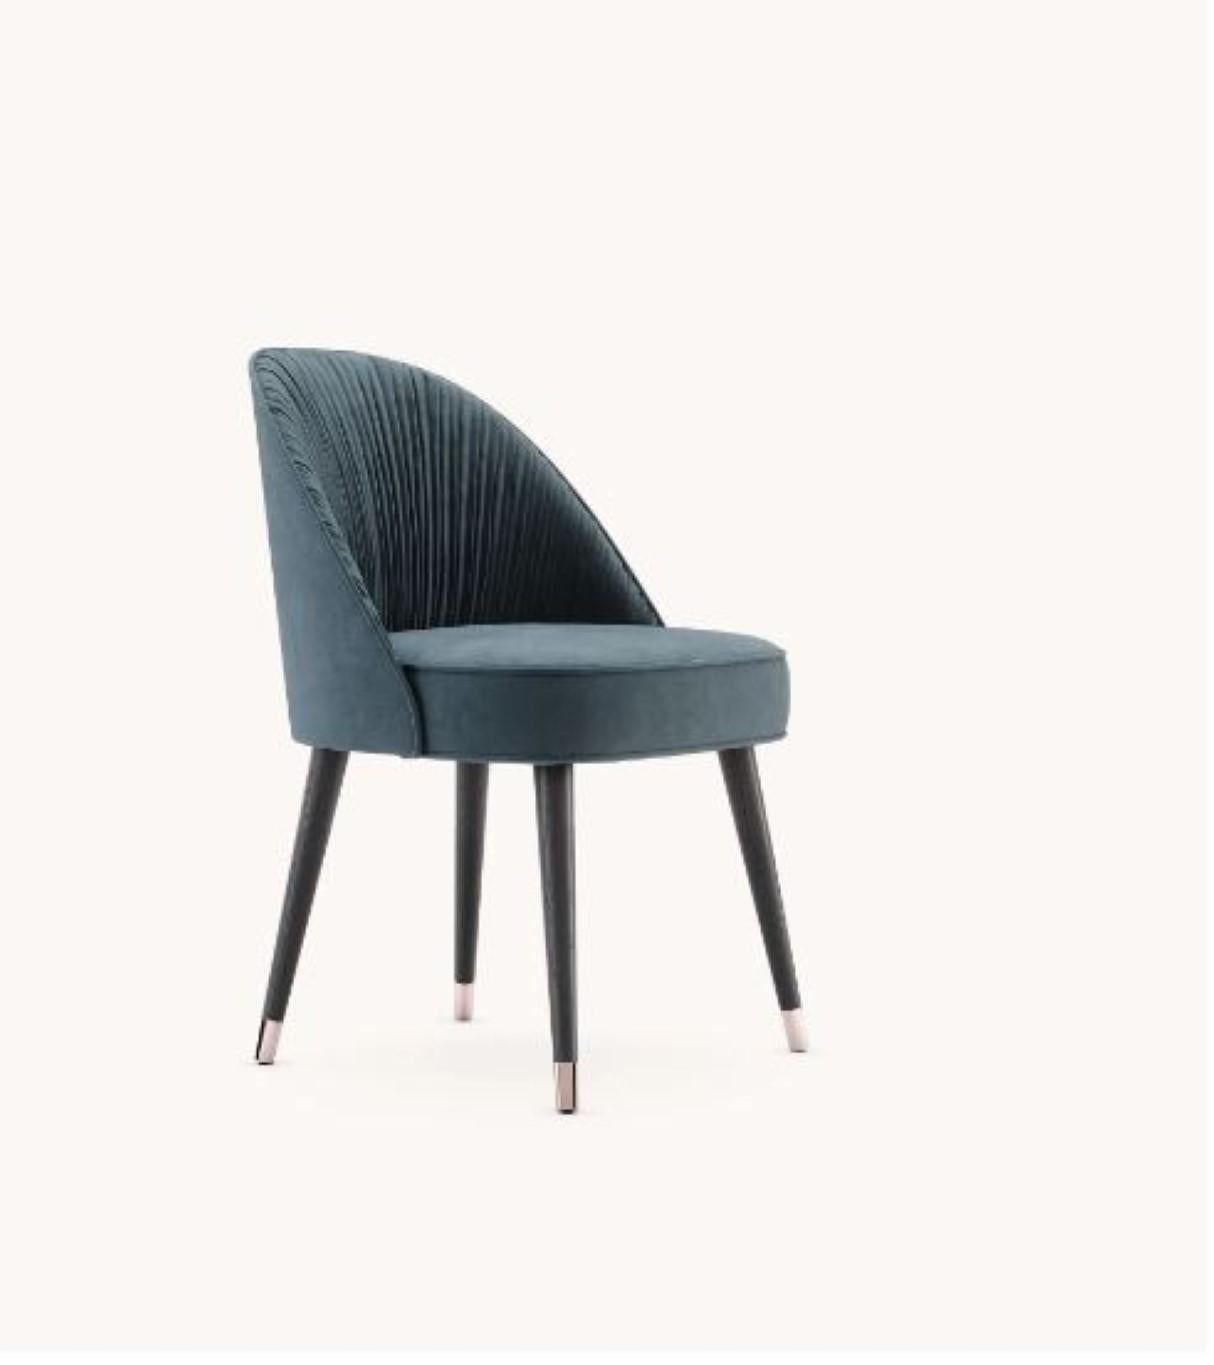 Camille chair with metal cups by Domkapa
Materials: Velvet, Black Ash Matte, Rose Gold Polished metal. 
Dimensions: W 57 x D 57 x H 81 cm. 
Also available in different materials. Please contact us.

Camille embraces the classic cosmopolitan of